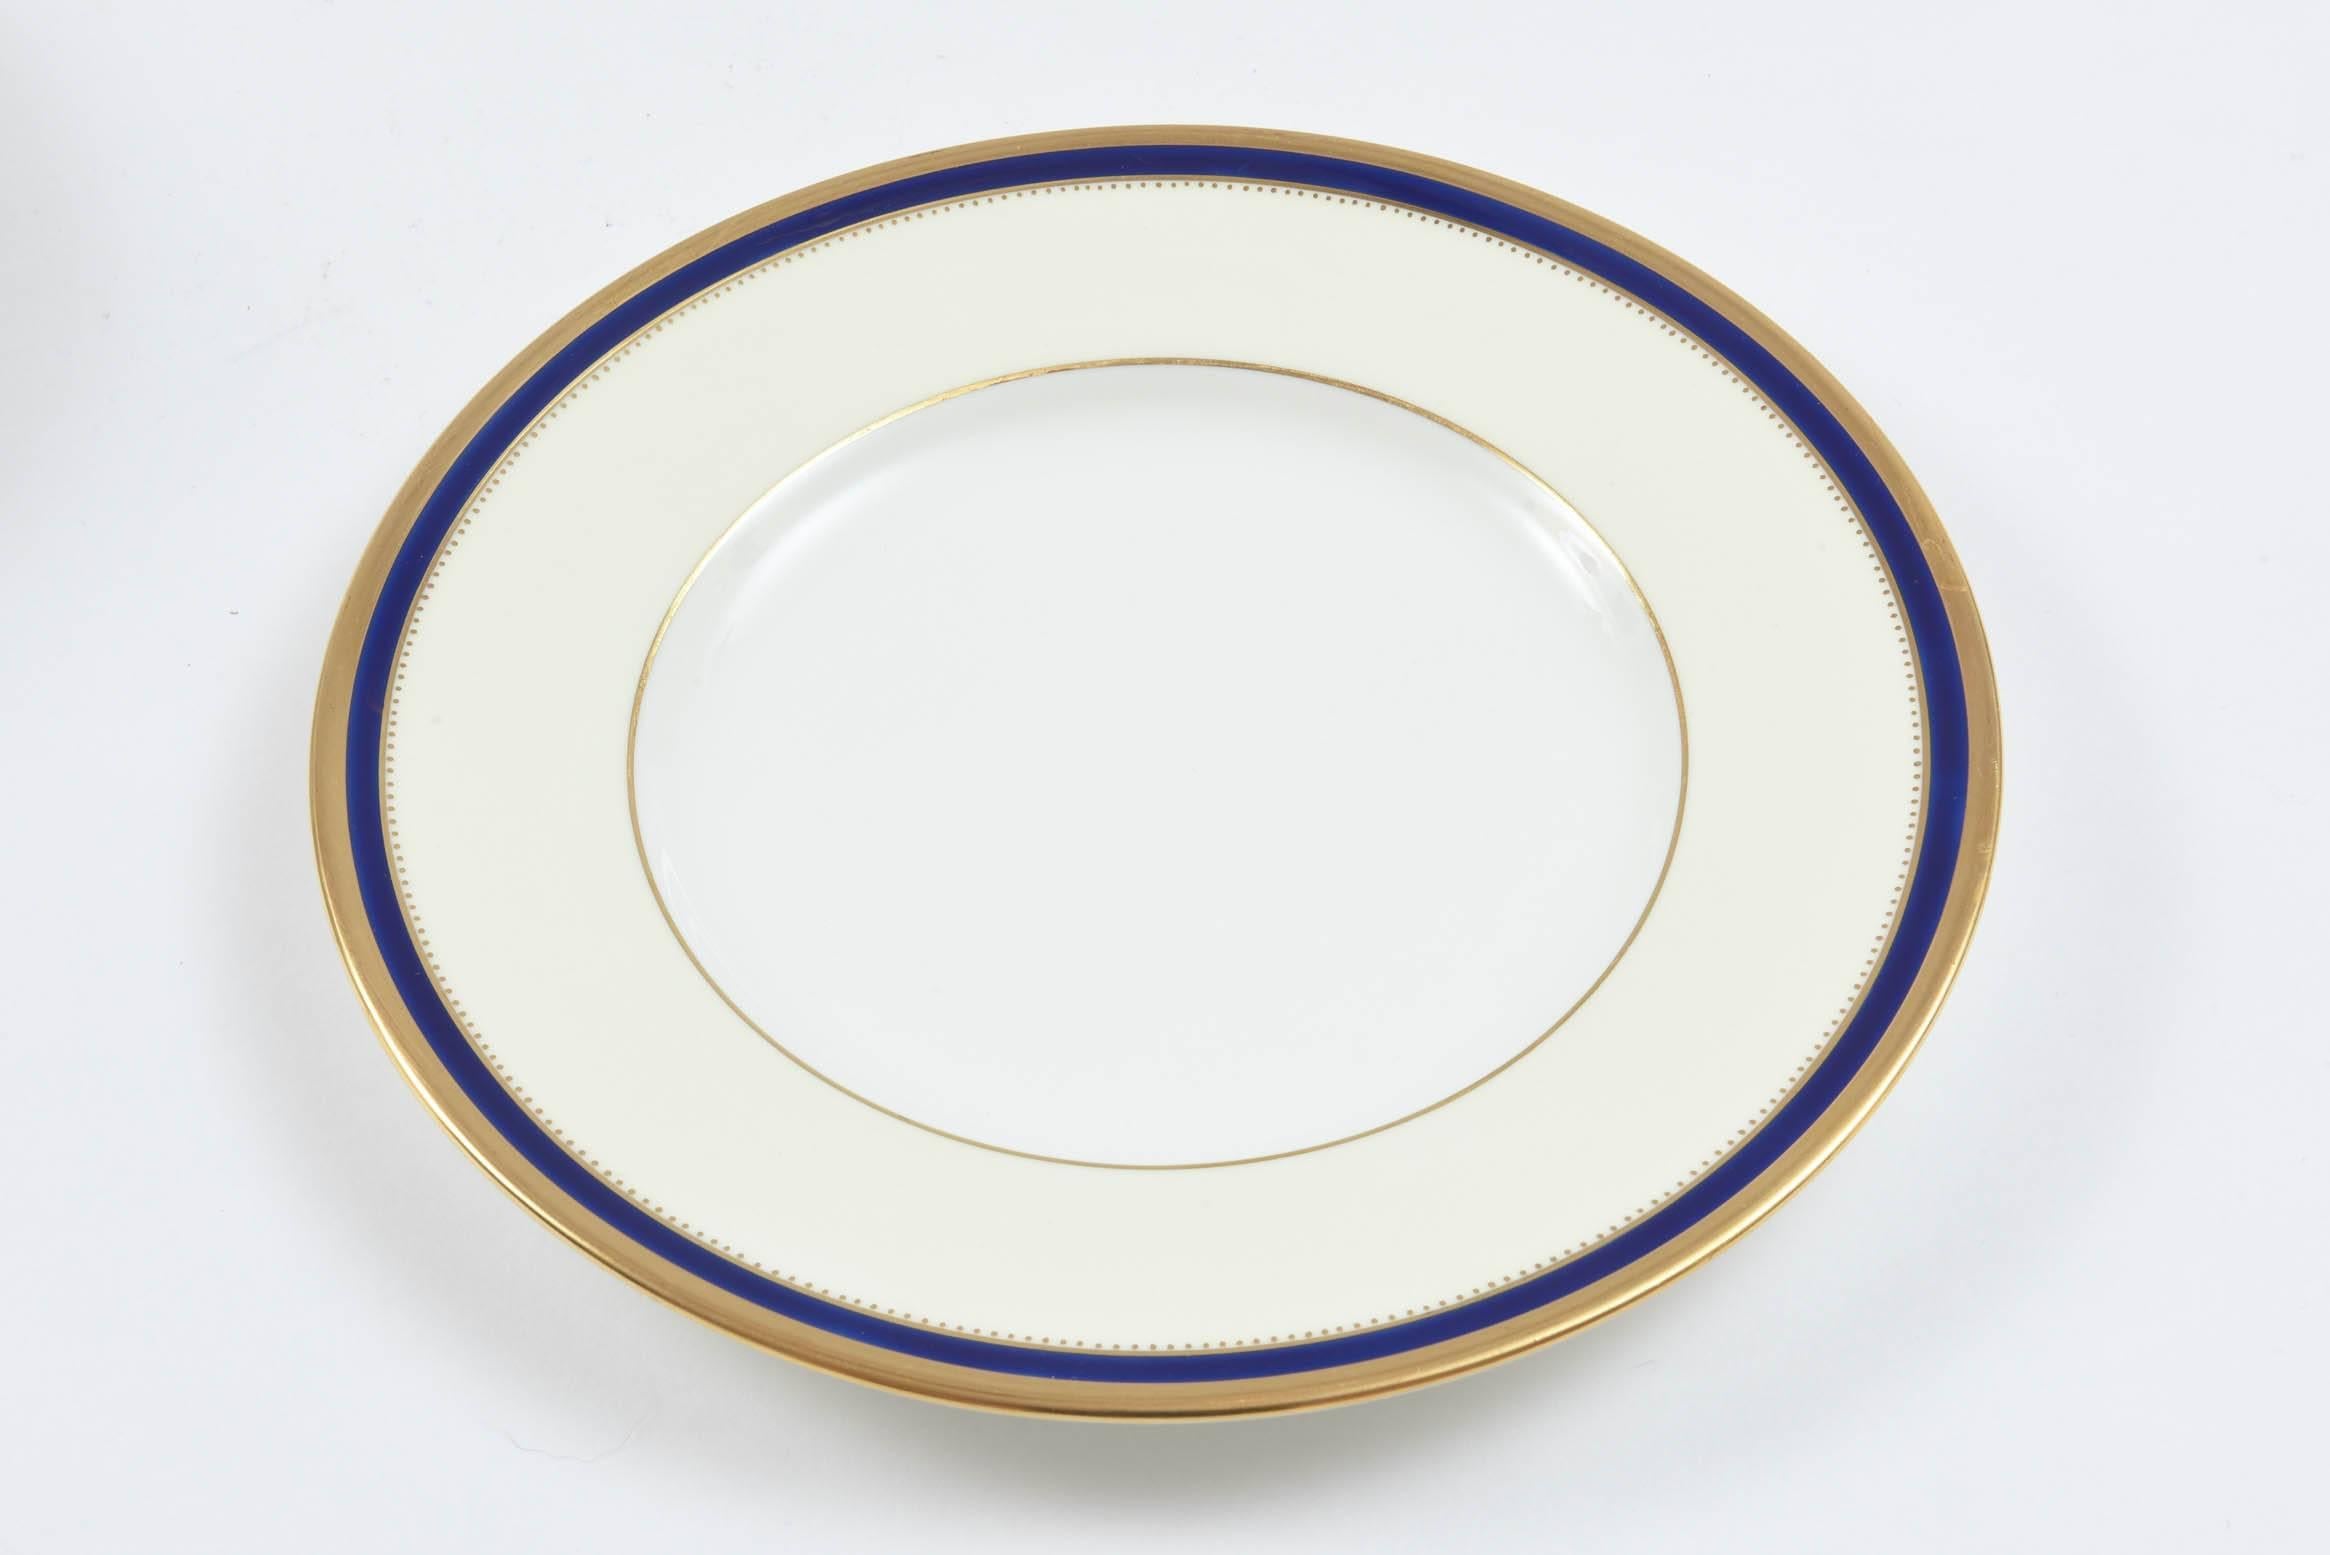 A great Classic set of plates perfect for so many courses, the go to size that you need more of. These have Minton's elegant white and cream background and collar with a thin band of cobalt blue and trimmed simply with gold. Very nice antique